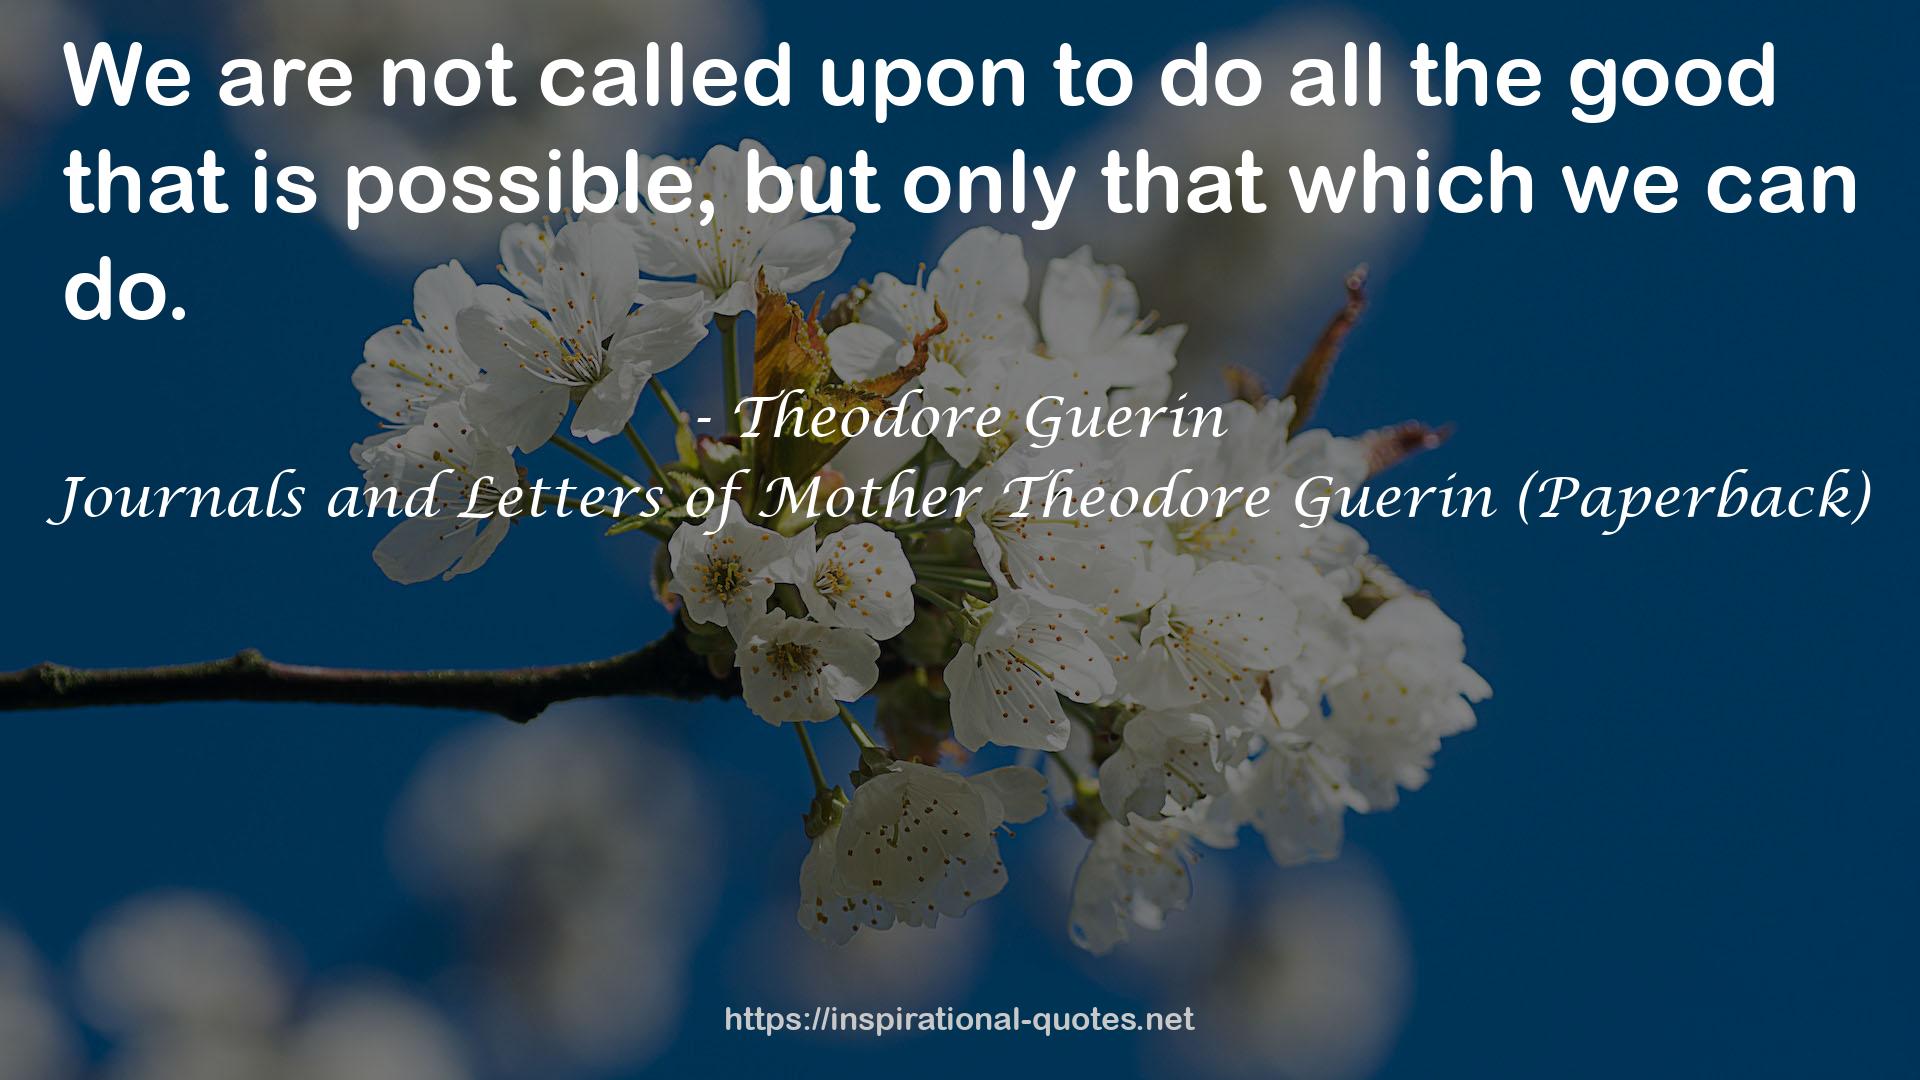 Journals and Letters of Mother Theodore Guerin (Paperback) QUOTES